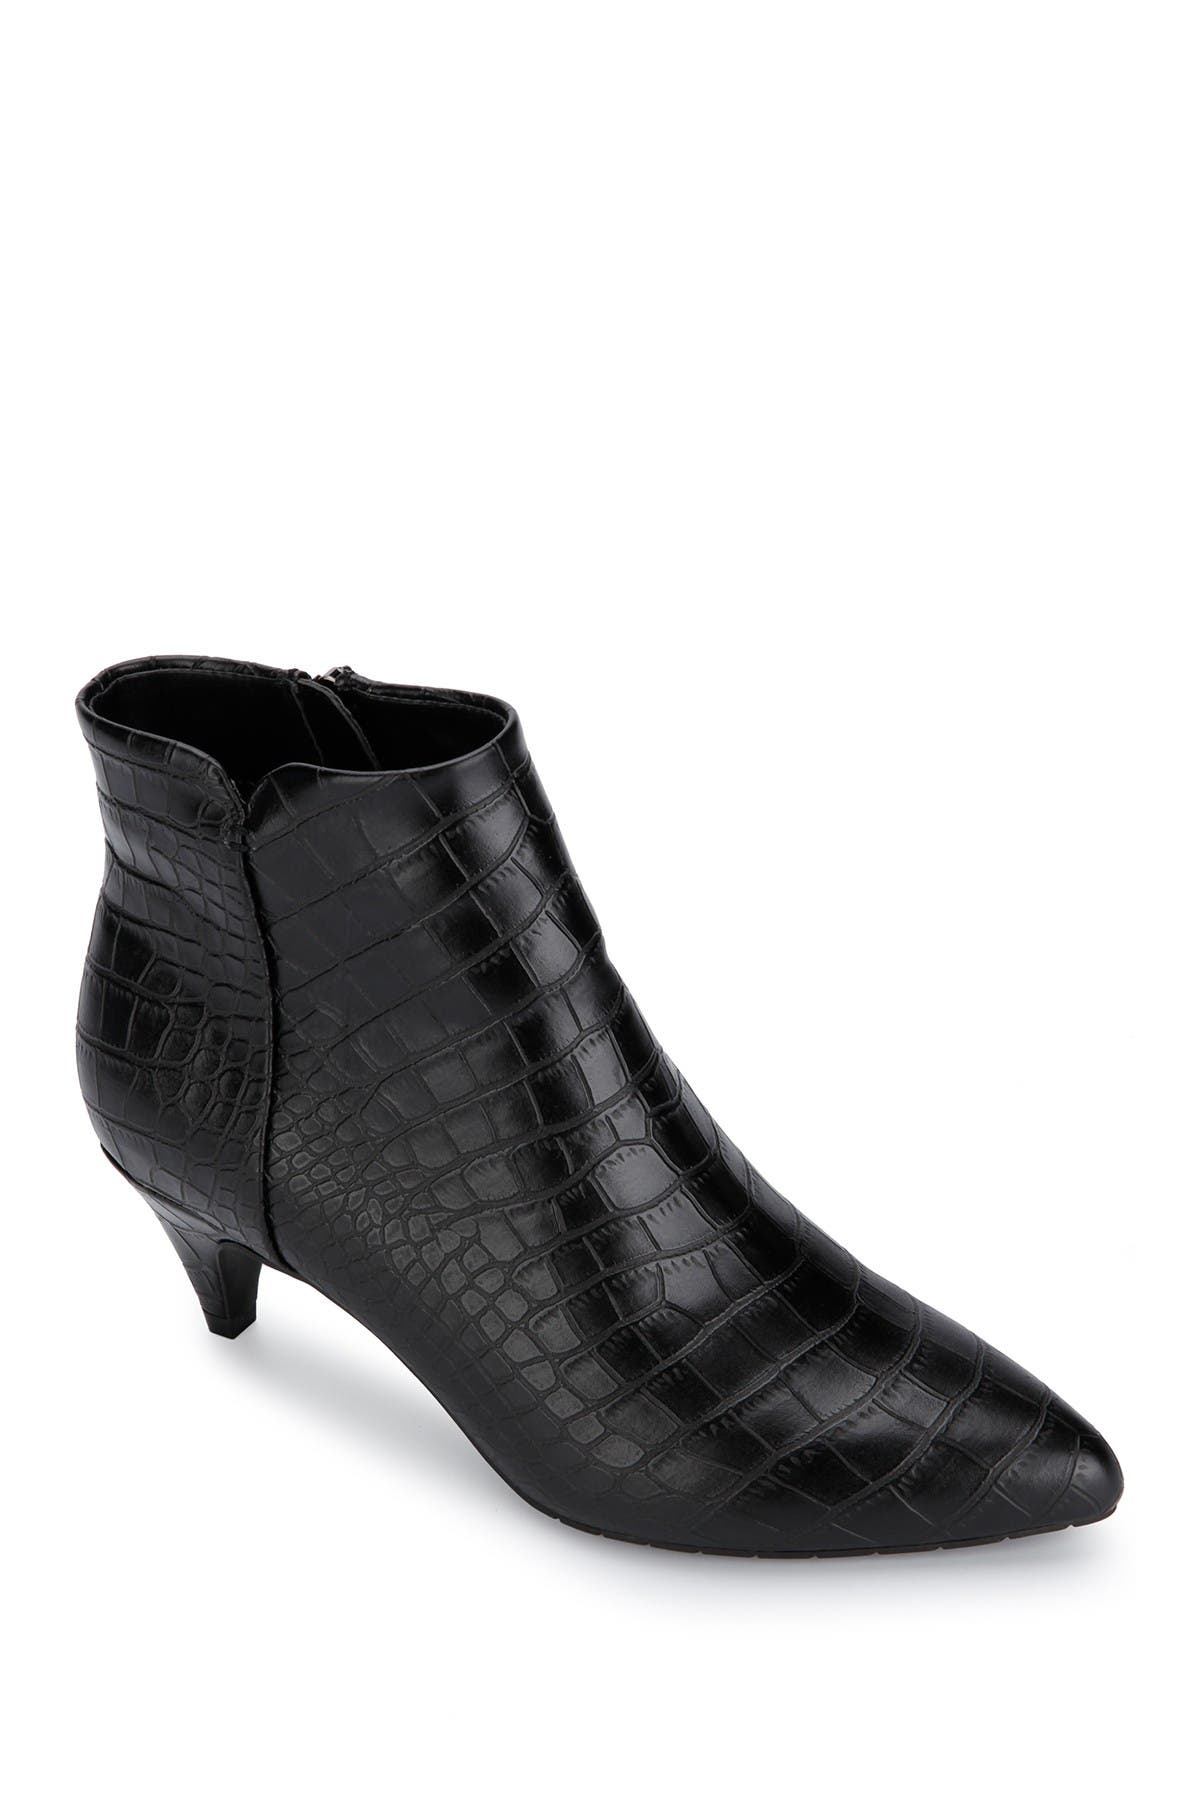 kenneth cole reaction black booties